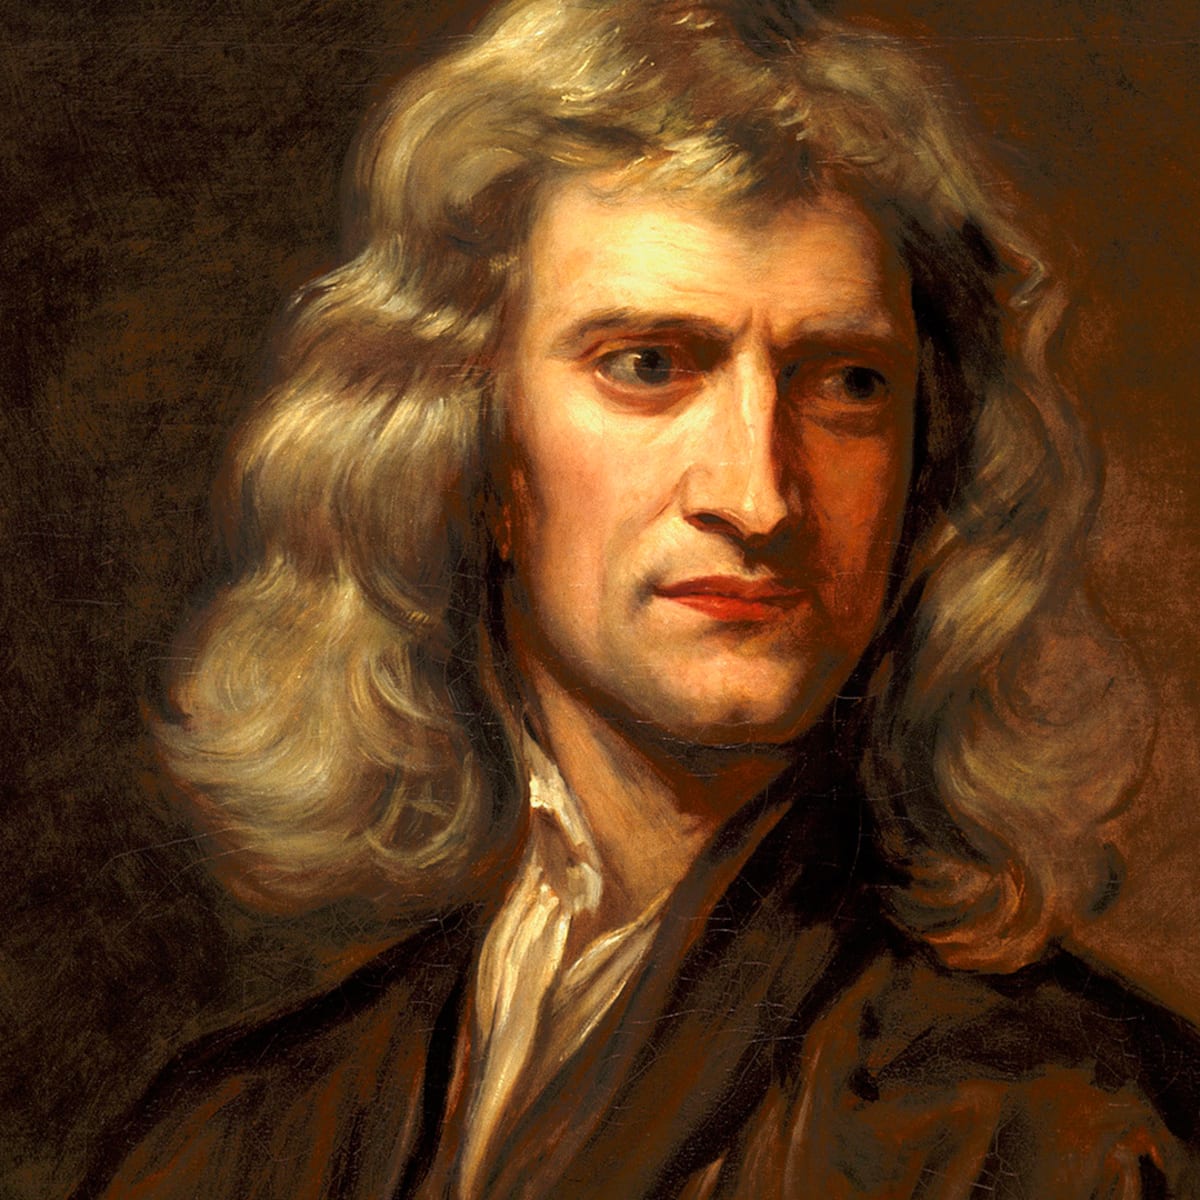 Isaac Newton Changed the World While in Quarantine From the Plague